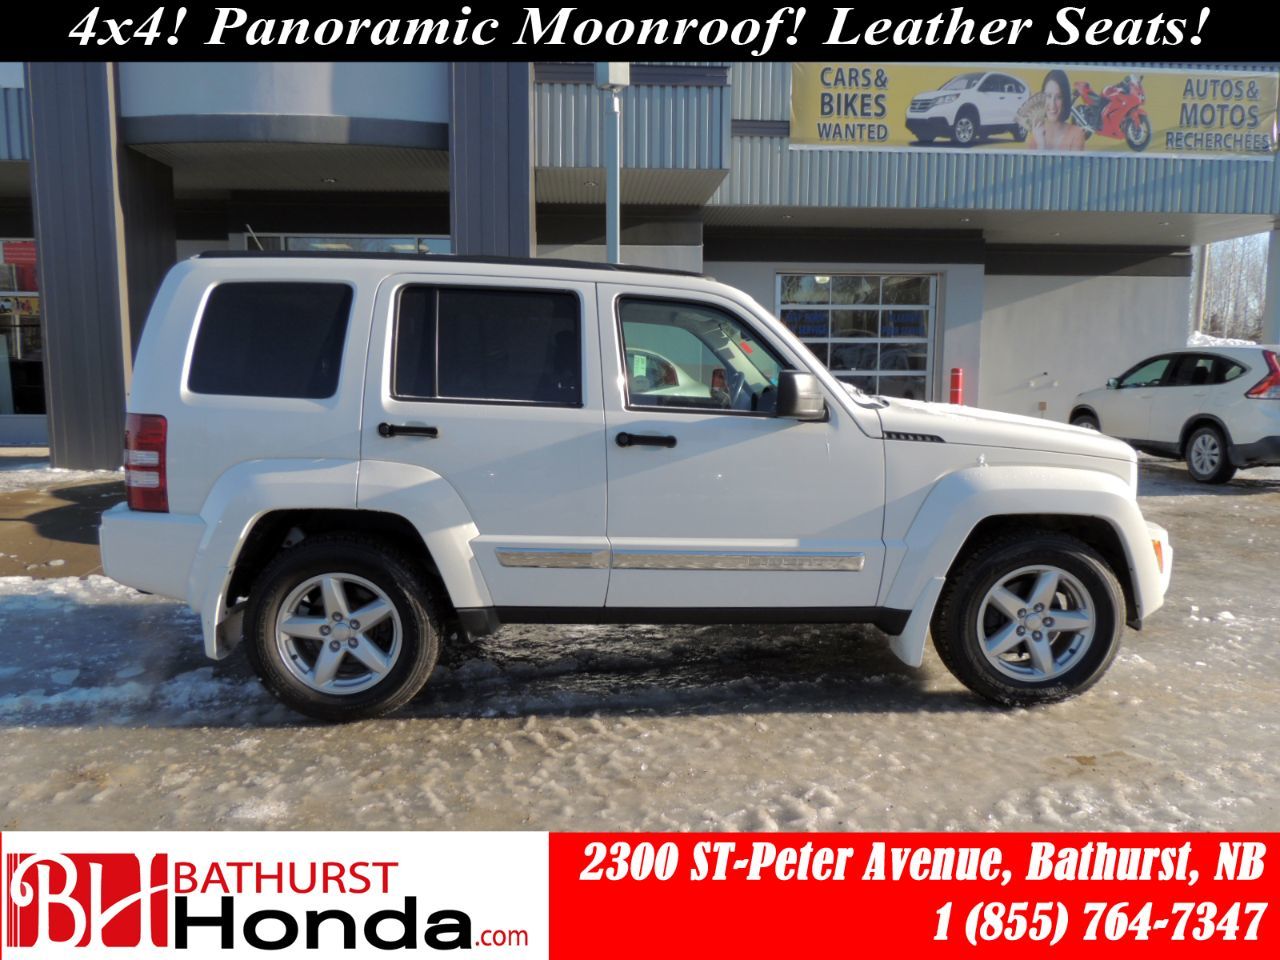 2010 Jeep liberty limited edition #4